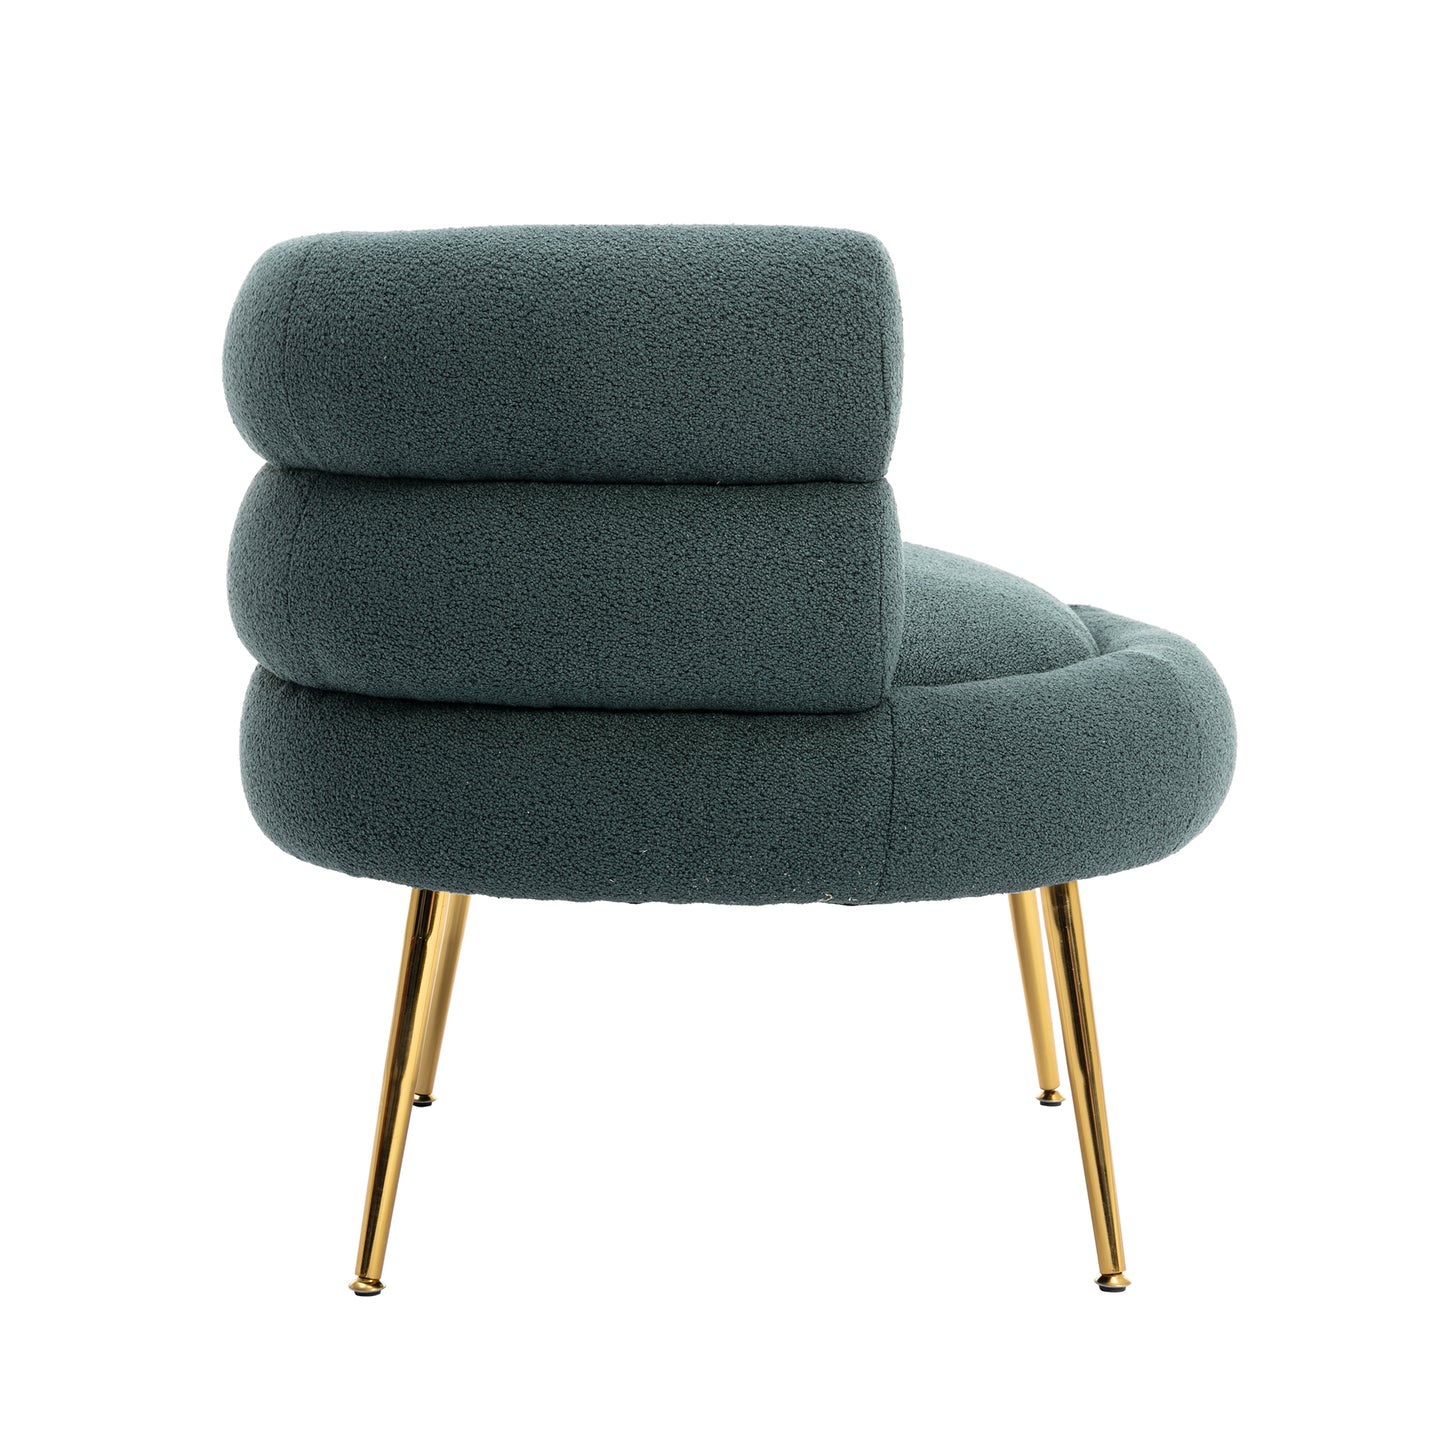 COOLMORE Accent  Chair  ,leisure sofa  with  Golden  feet